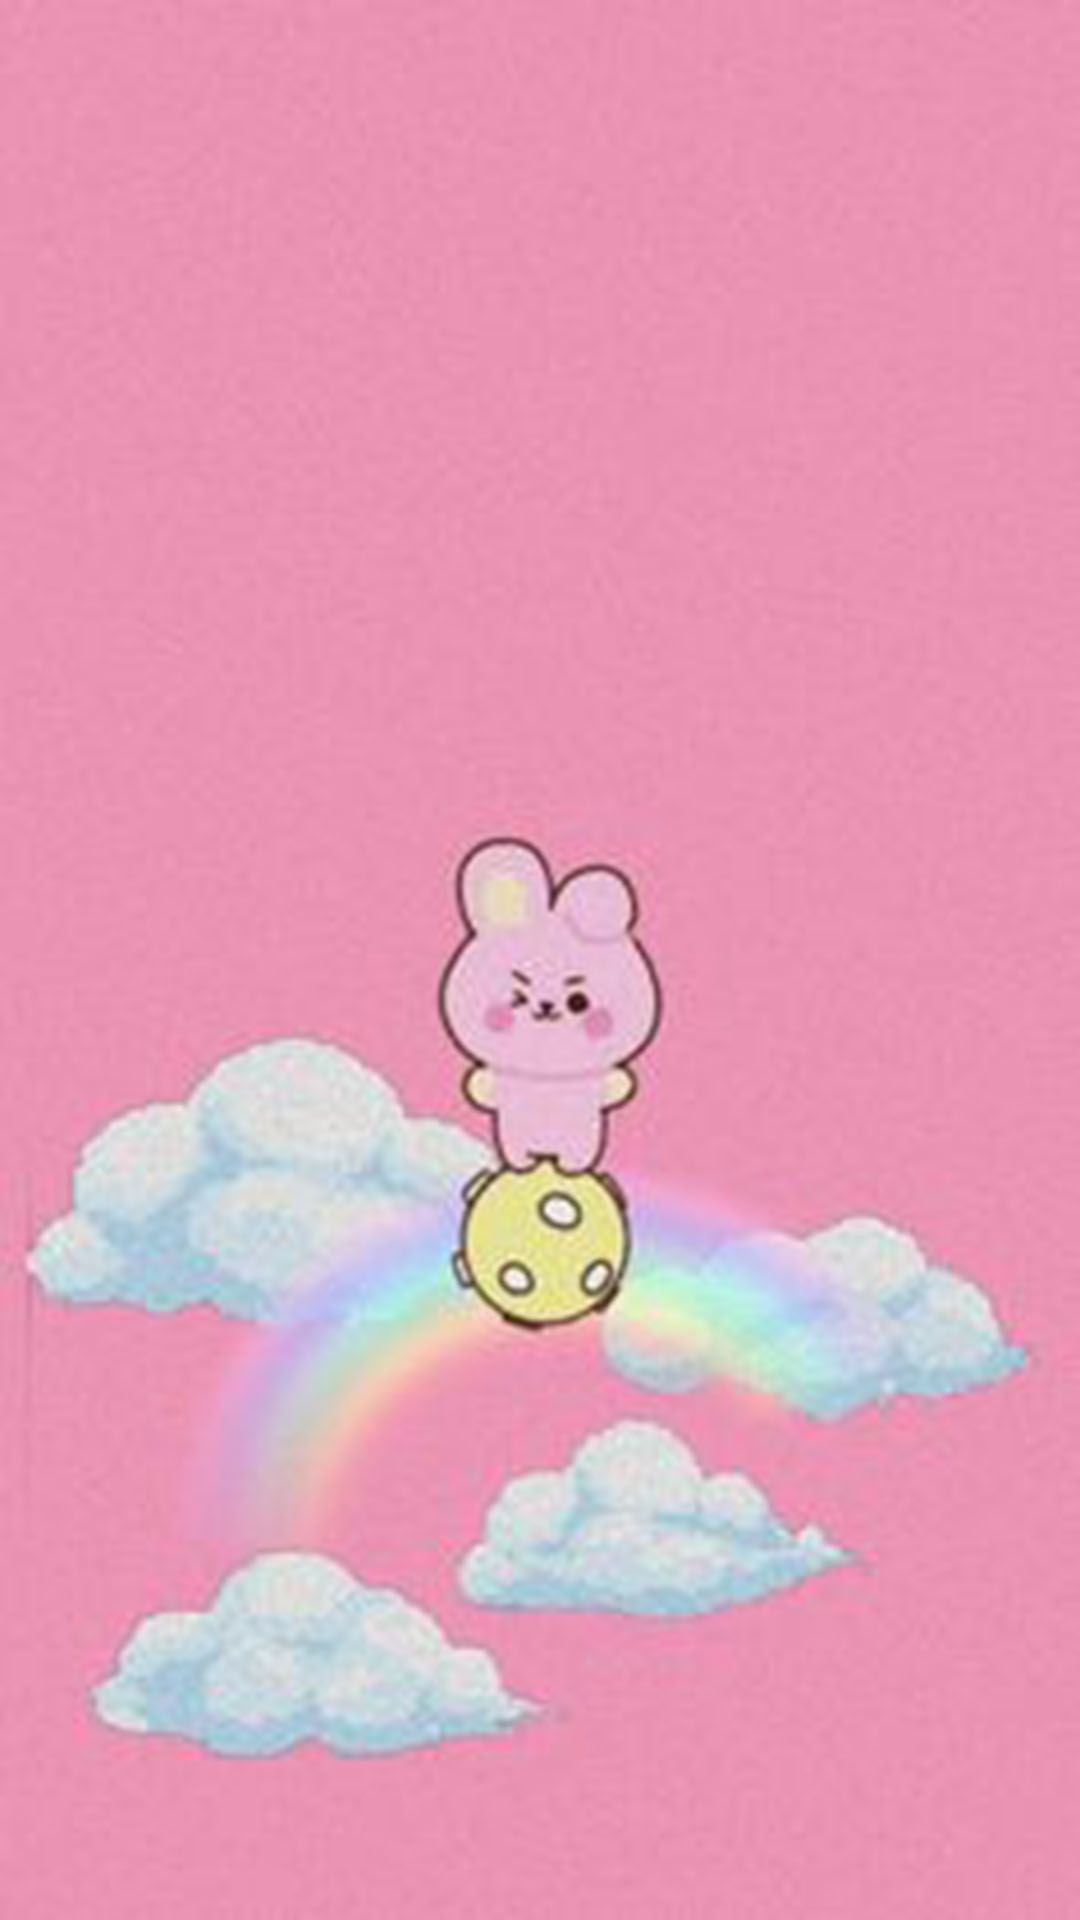 BTS Bangtan Boys Cooky iPhone Wallpaper with high-resolution 1080x1920 pixel. You can use this wallpaper for your iPhone 5, 6, 7, 8, X, XS, XR backgrounds, Mobile Screensaver, or iPad Lock Screen - BT21